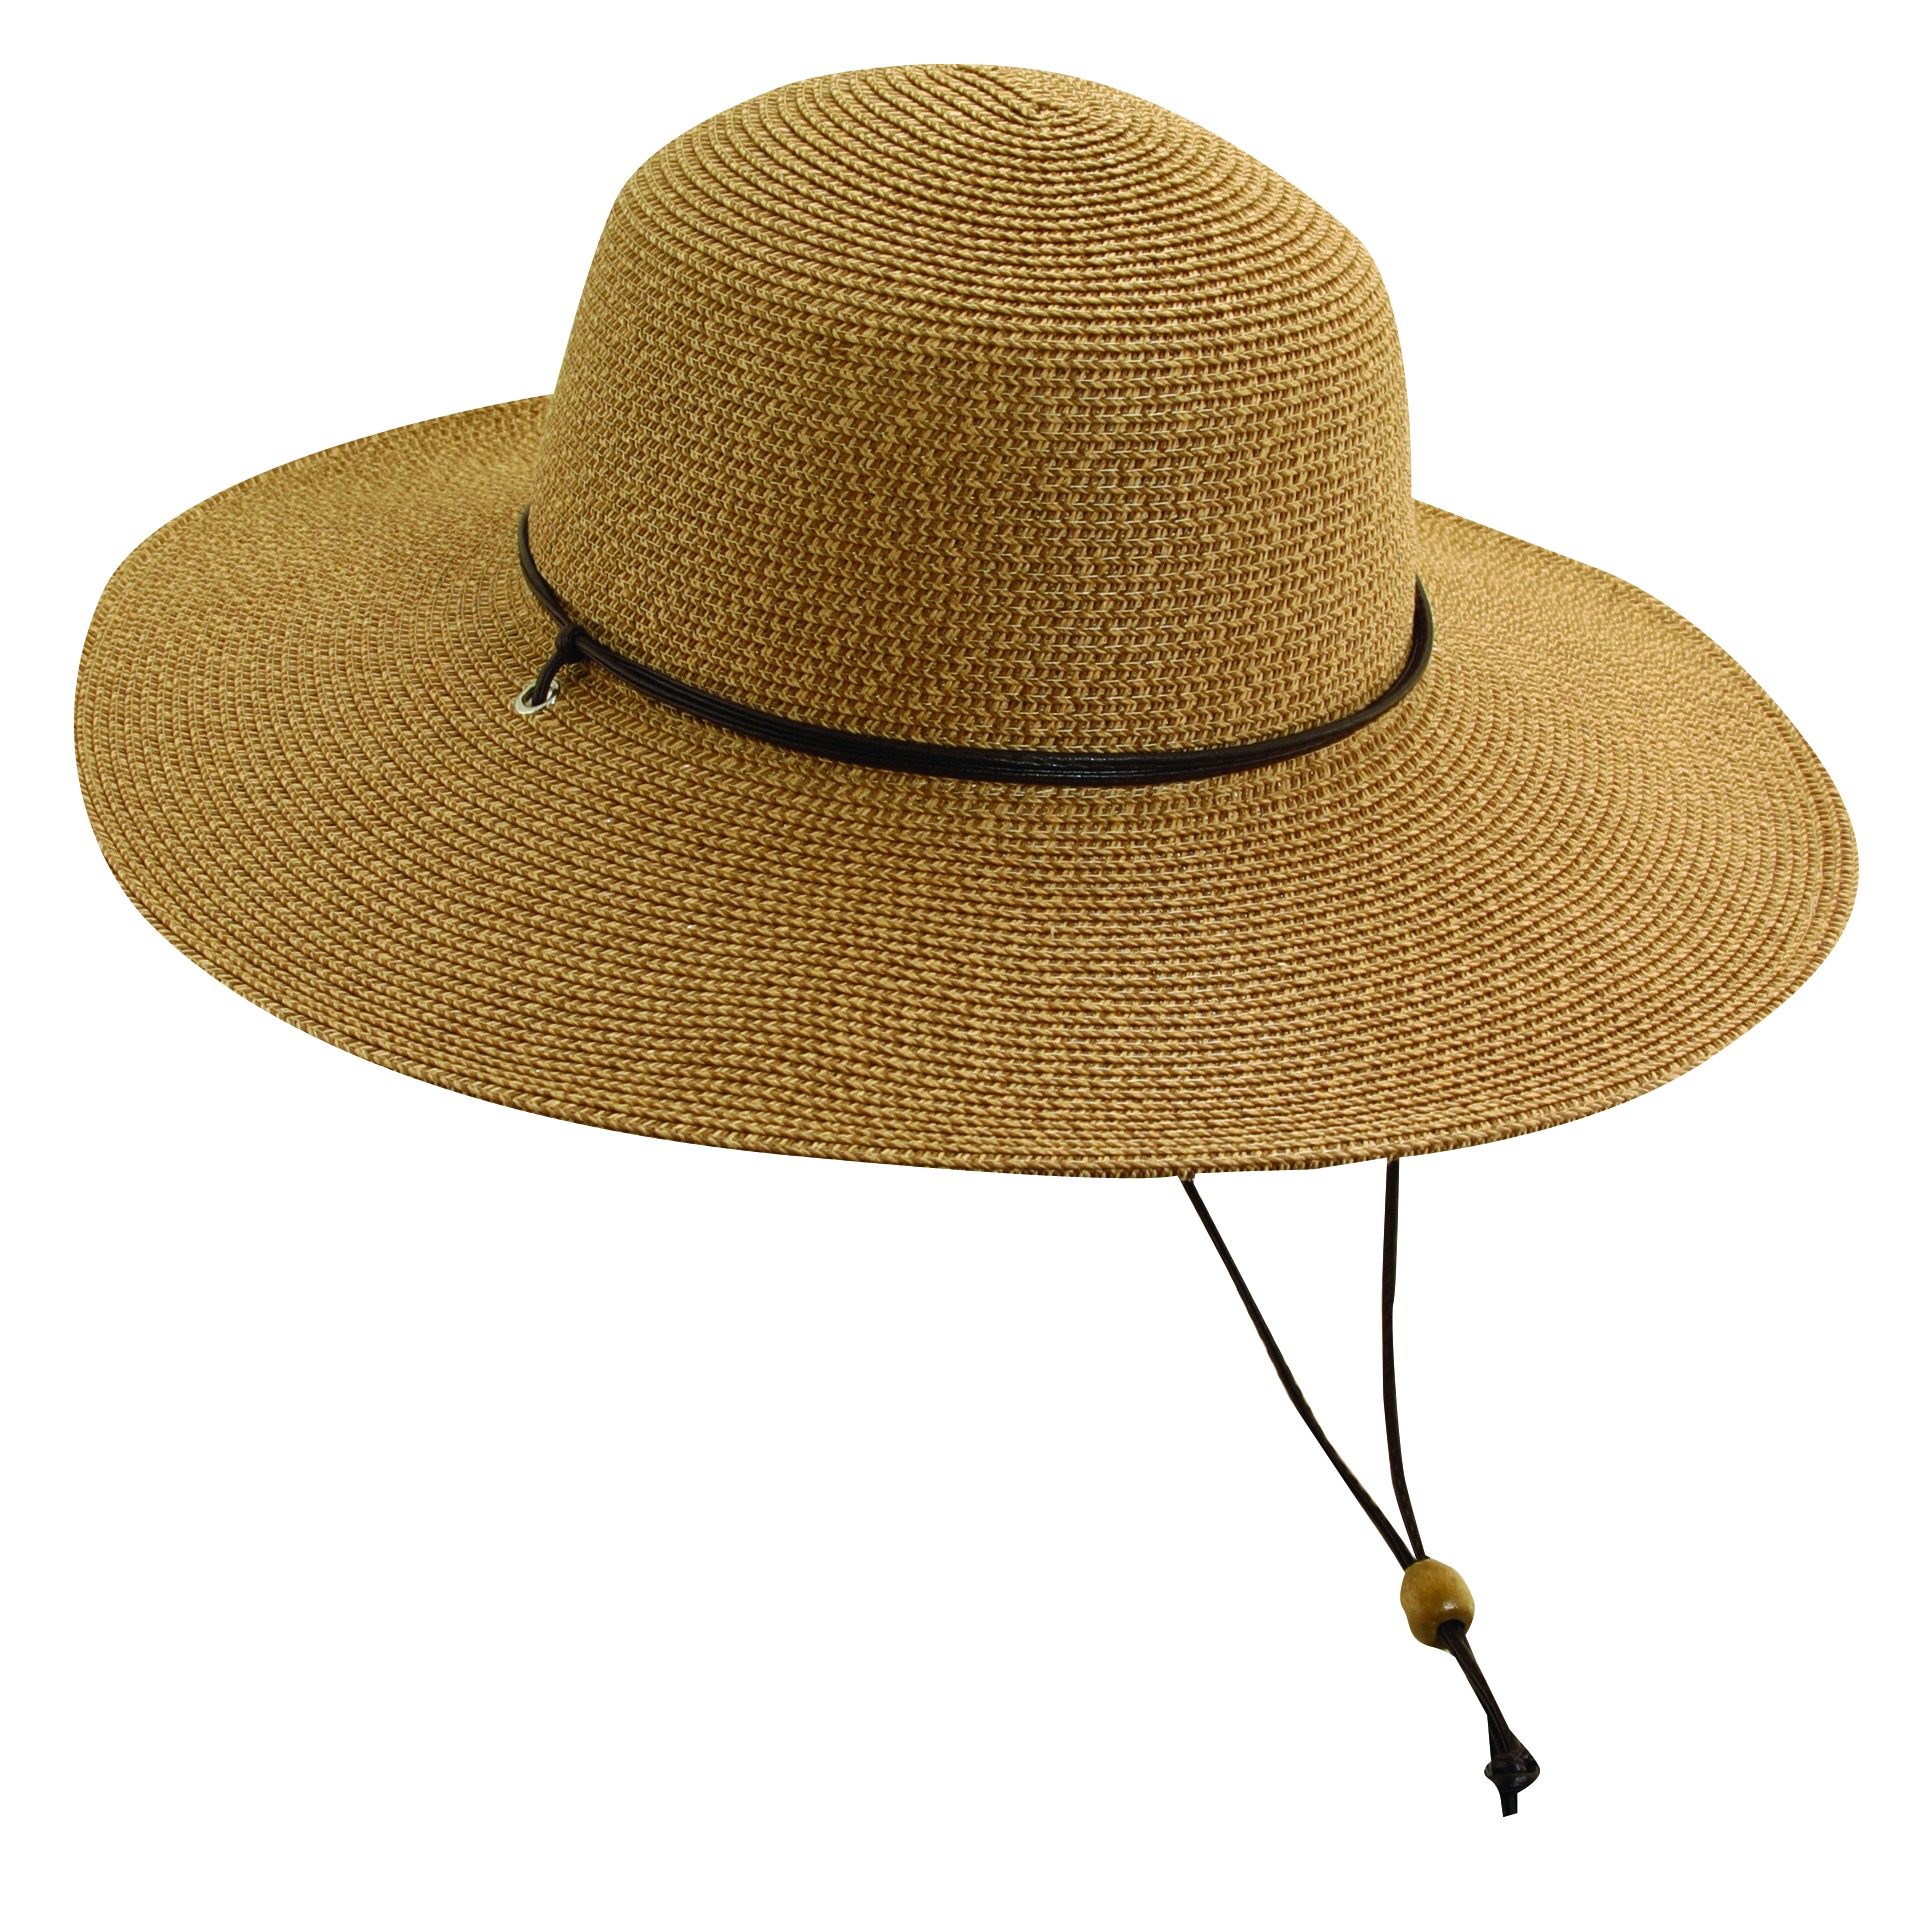 Paper Braid Sun Hat with Chin Cord | Explorer Hats